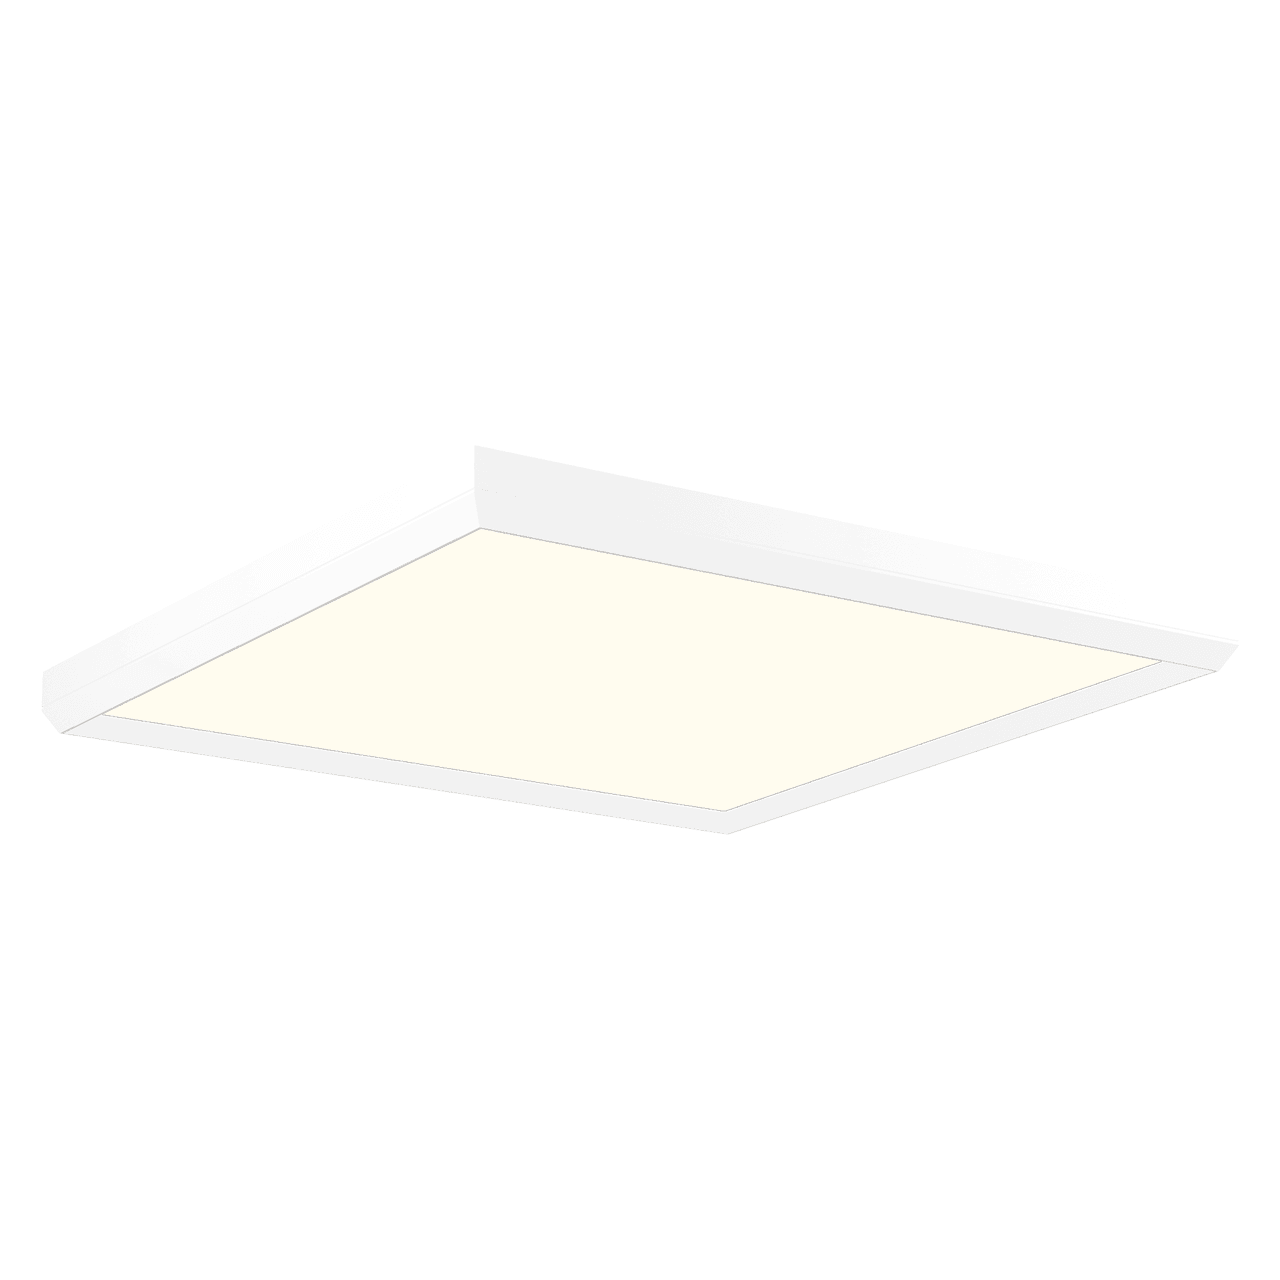 Pageone - Skylight (Square 23.6"L). Ceiling. Flush Mount - Hbdepot